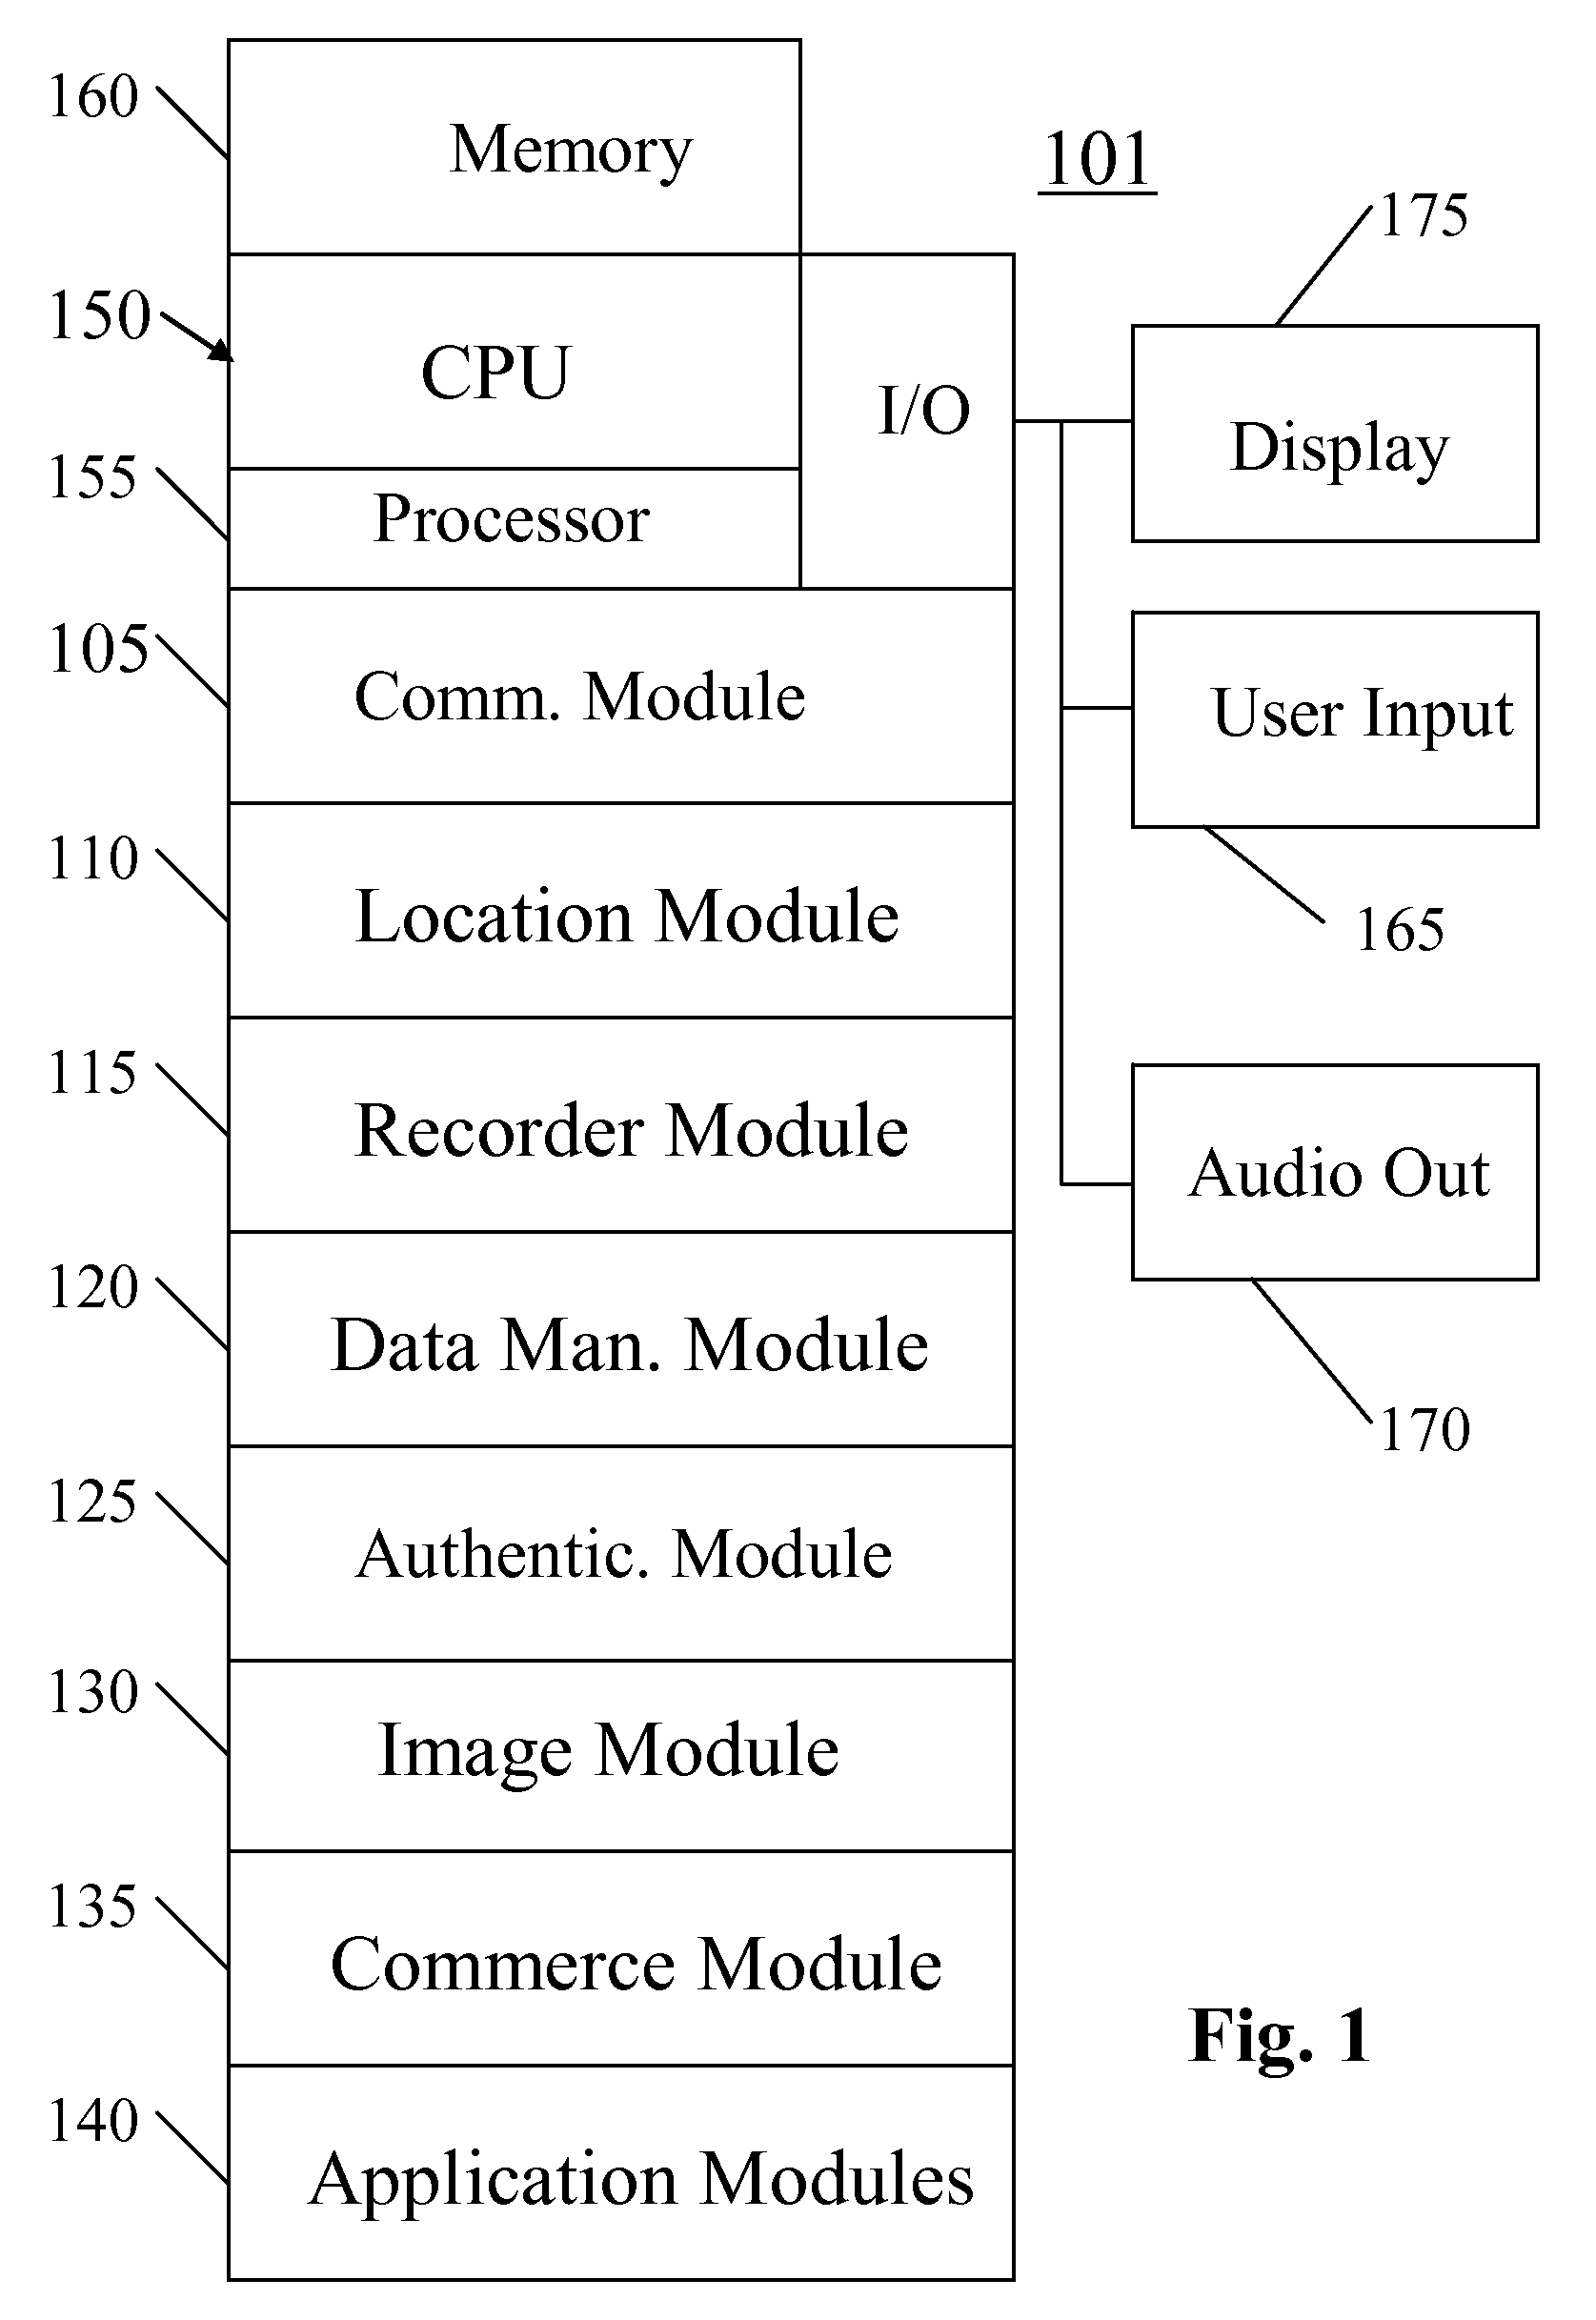 System, Method, and Computer Program Product for Video Based Services and Commerce